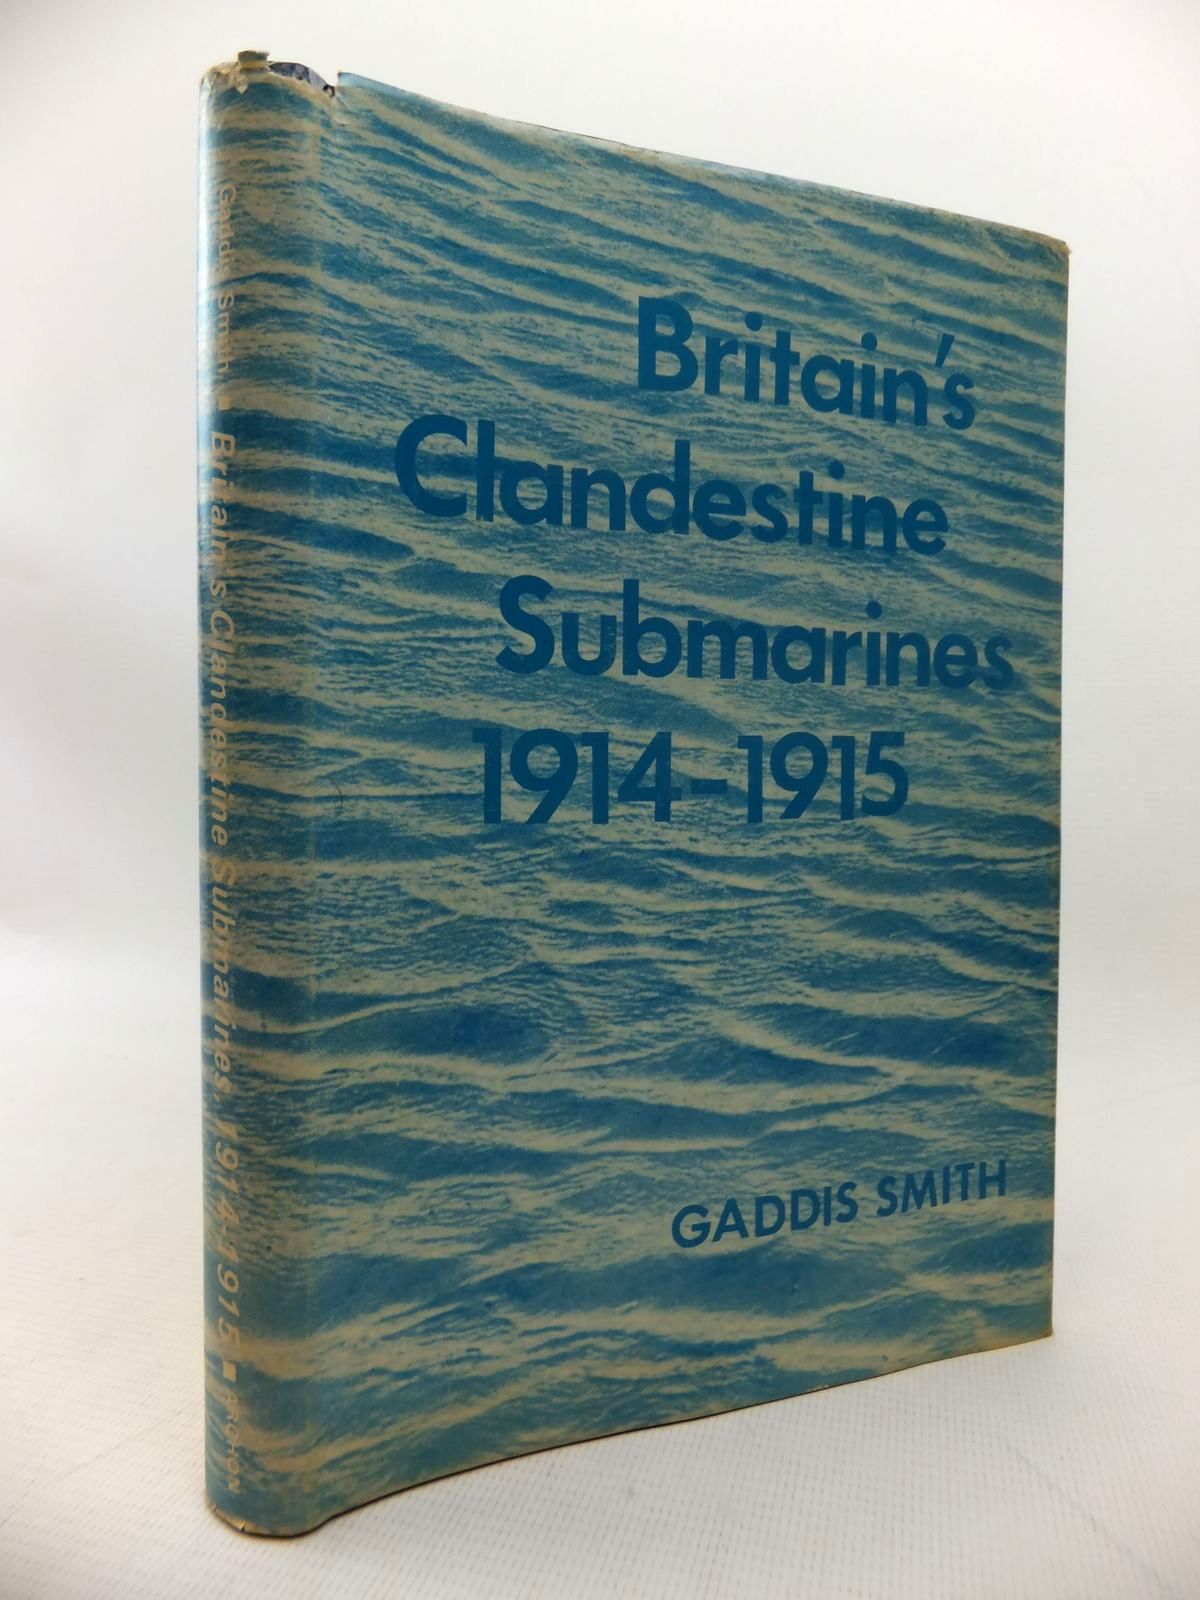 Photo of BRITAIN'S CLANDESTINE SUBMARINES 1914-1915 written by Smith, Gaddis published by Archon Books (STOCK CODE: 1814221)  for sale by Stella & Rose's Books